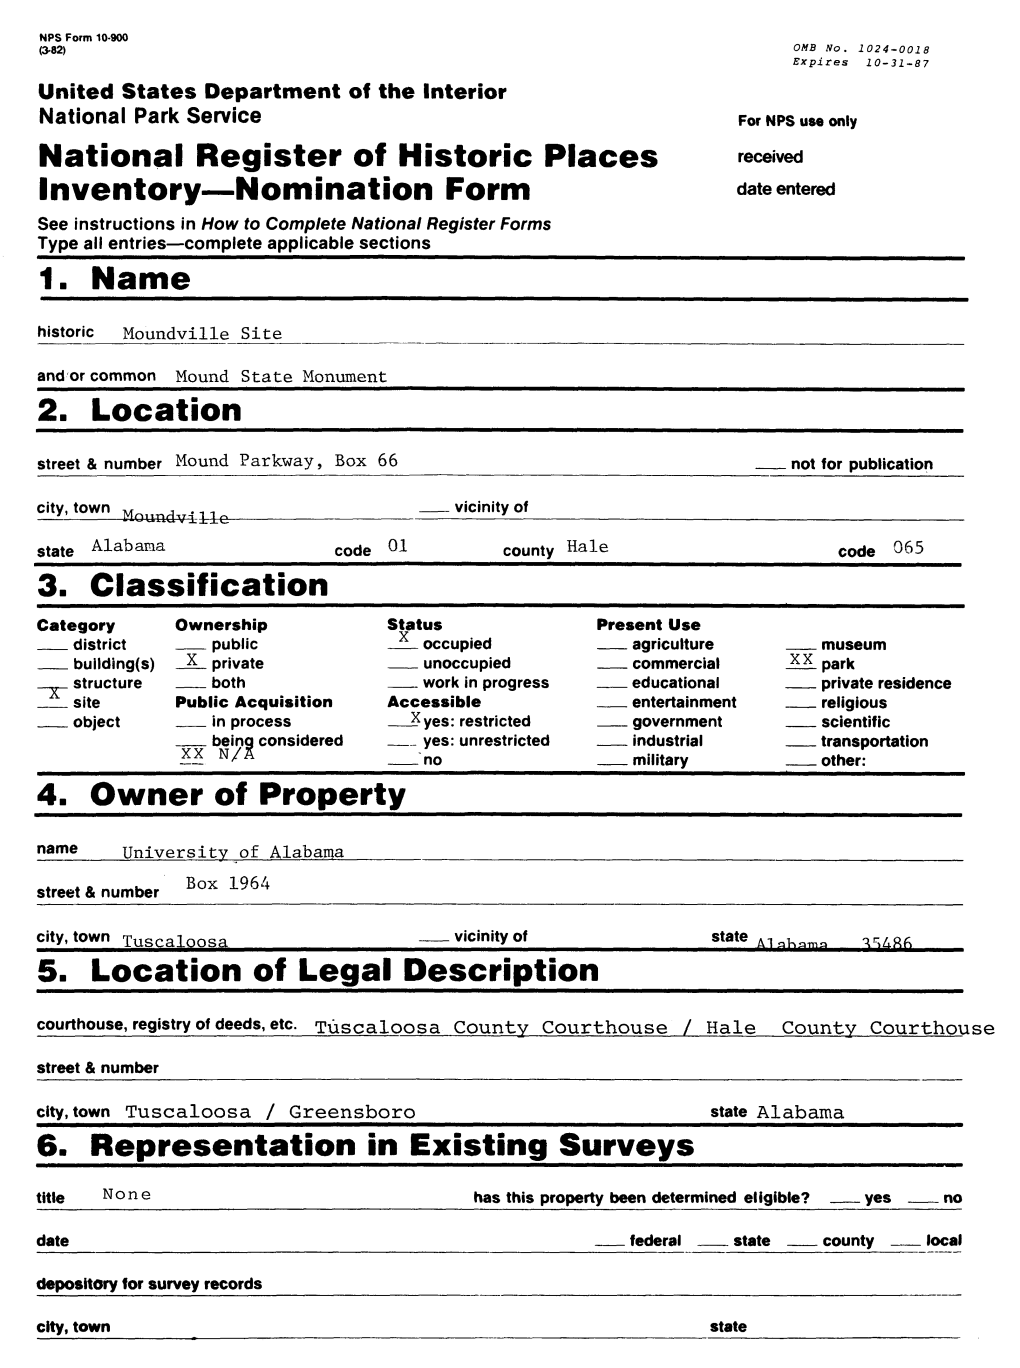 National Register of Historic Places Inventory—Nomination Form 1